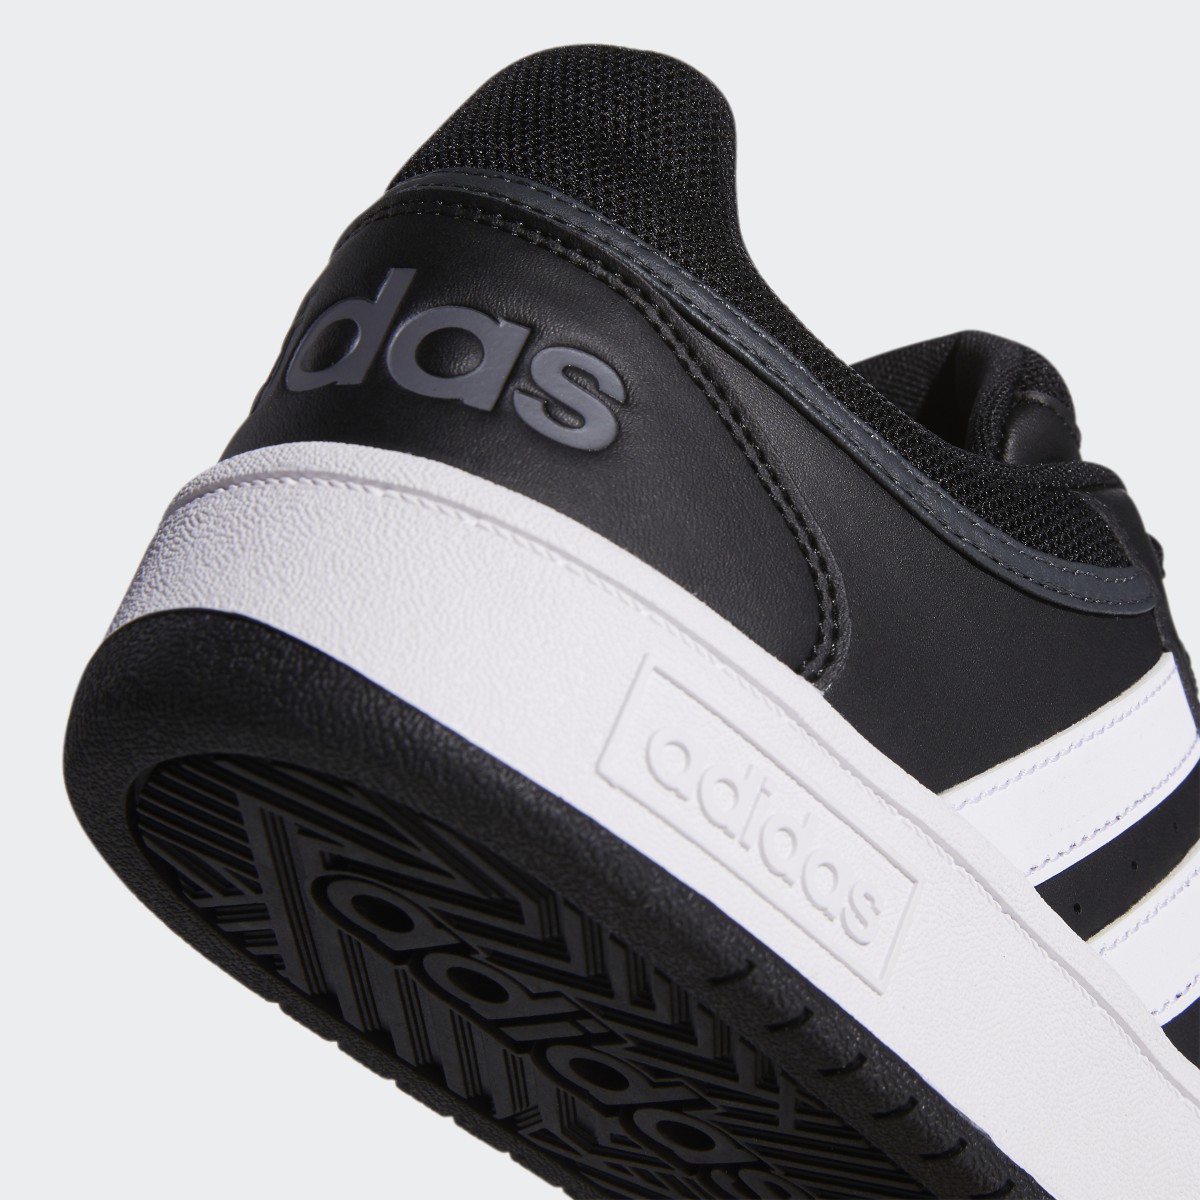 Adidas Hoops 3.0 Low Classic Vintage Shoes. 8